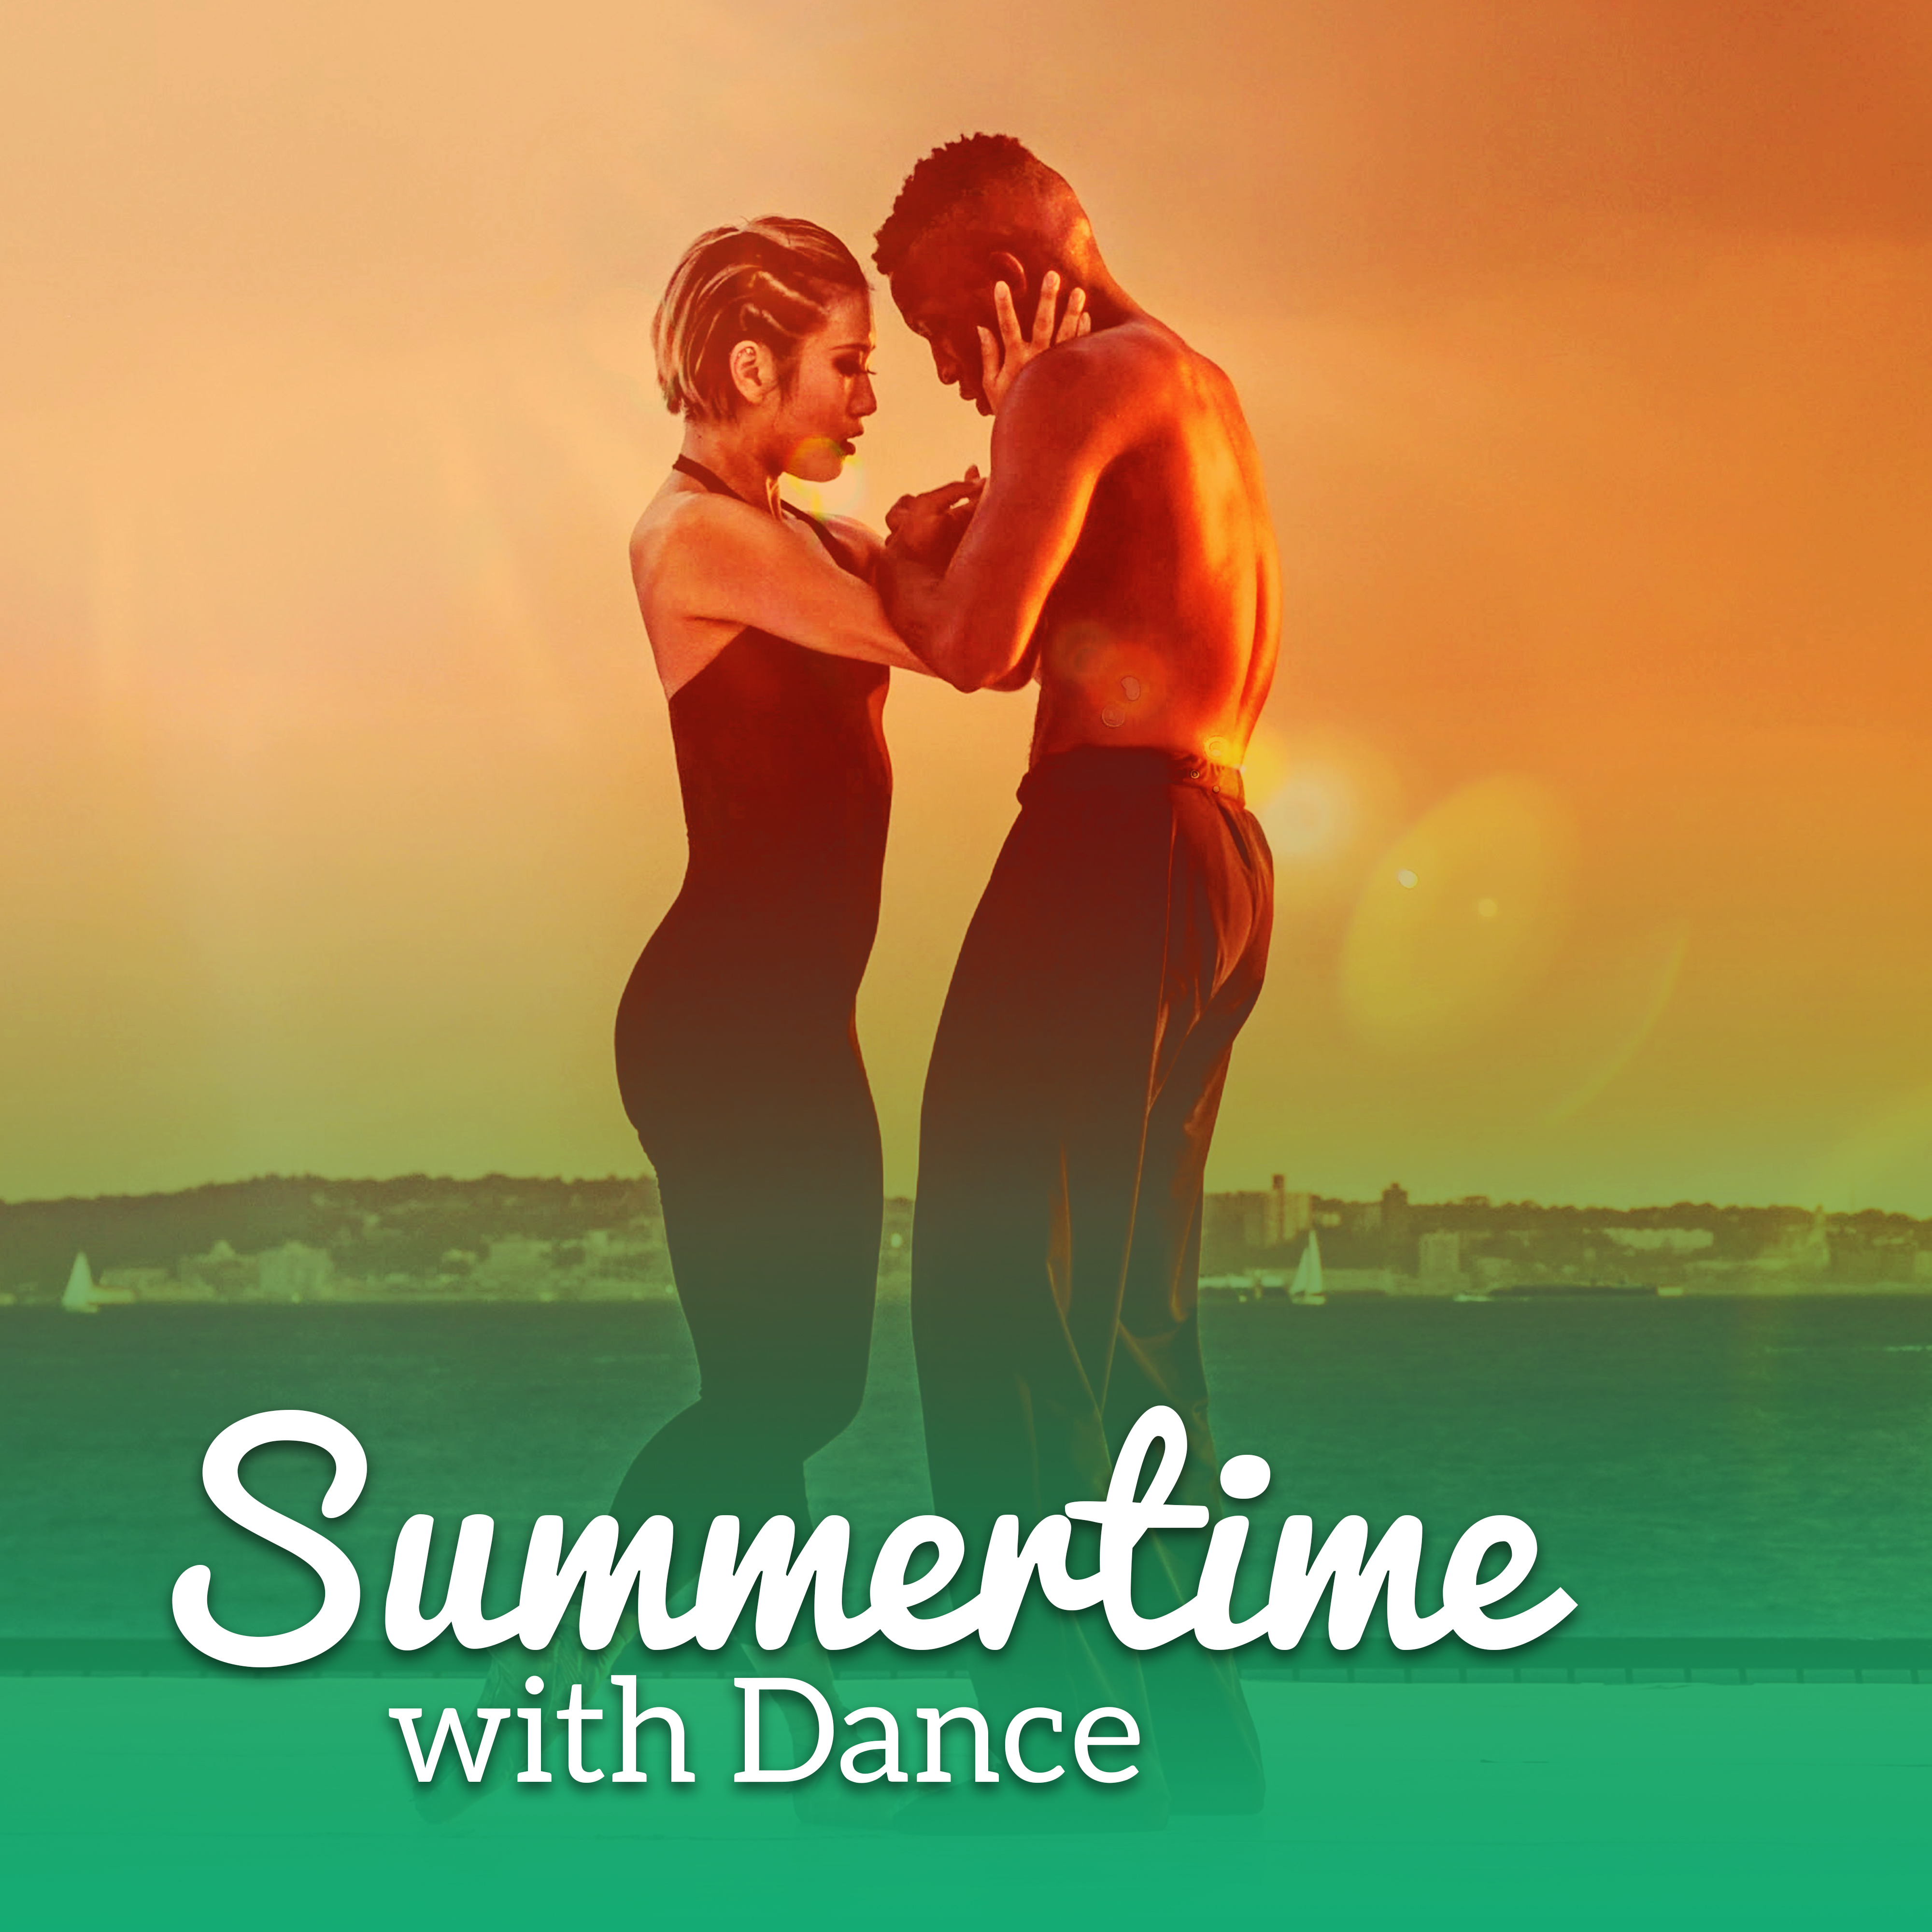 Summertime with Dance – Ibiza Dance Party, Holiday Vibes, Night Sounds, Ibiza Poolside, Bar Chill Out, Colorful Drinks, Dancefloor